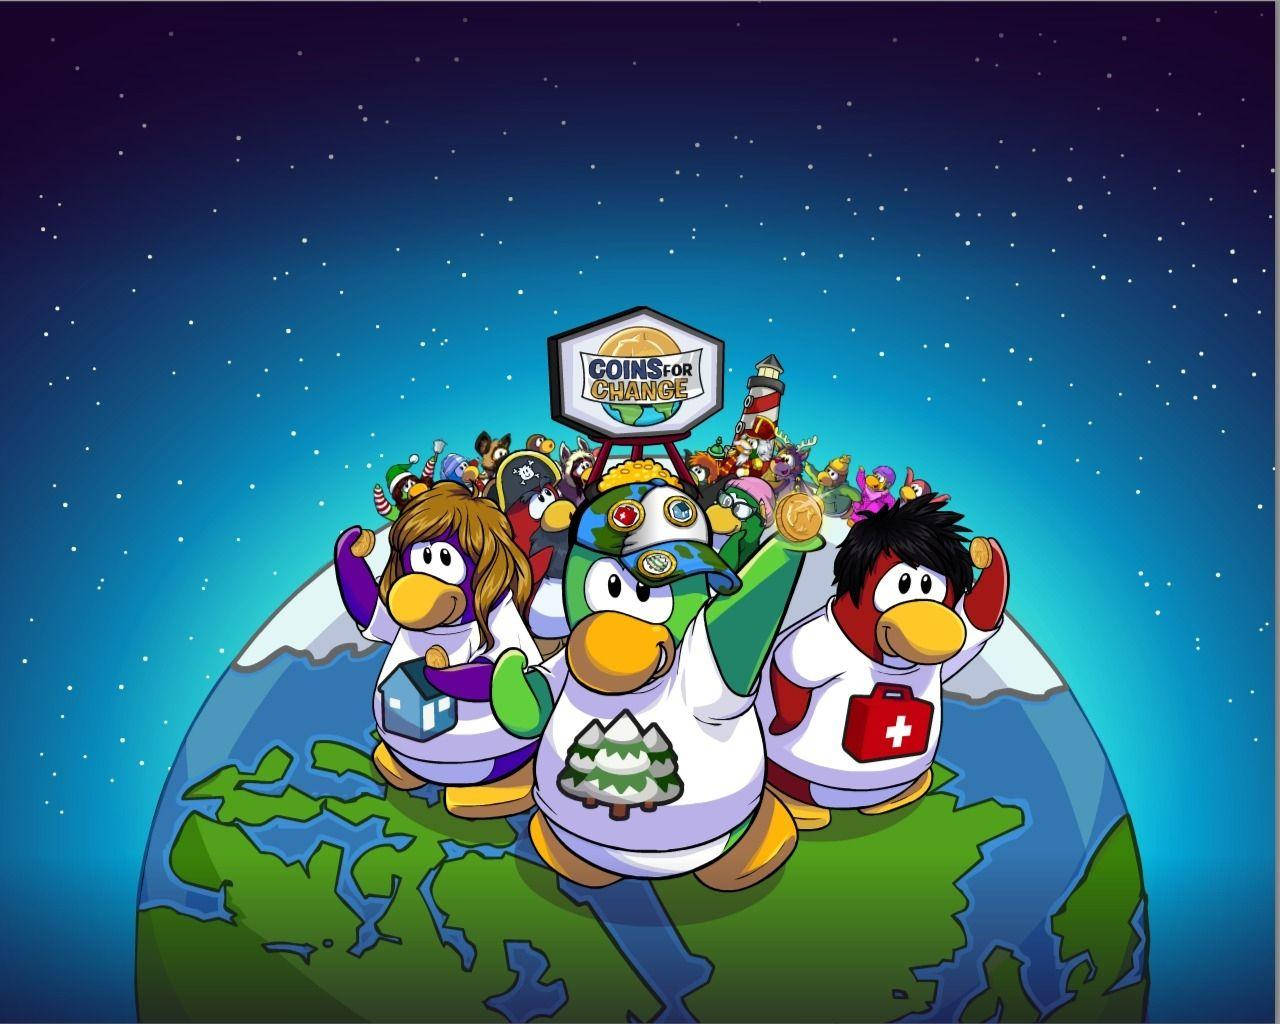 Club Penguin for iPhone - Download